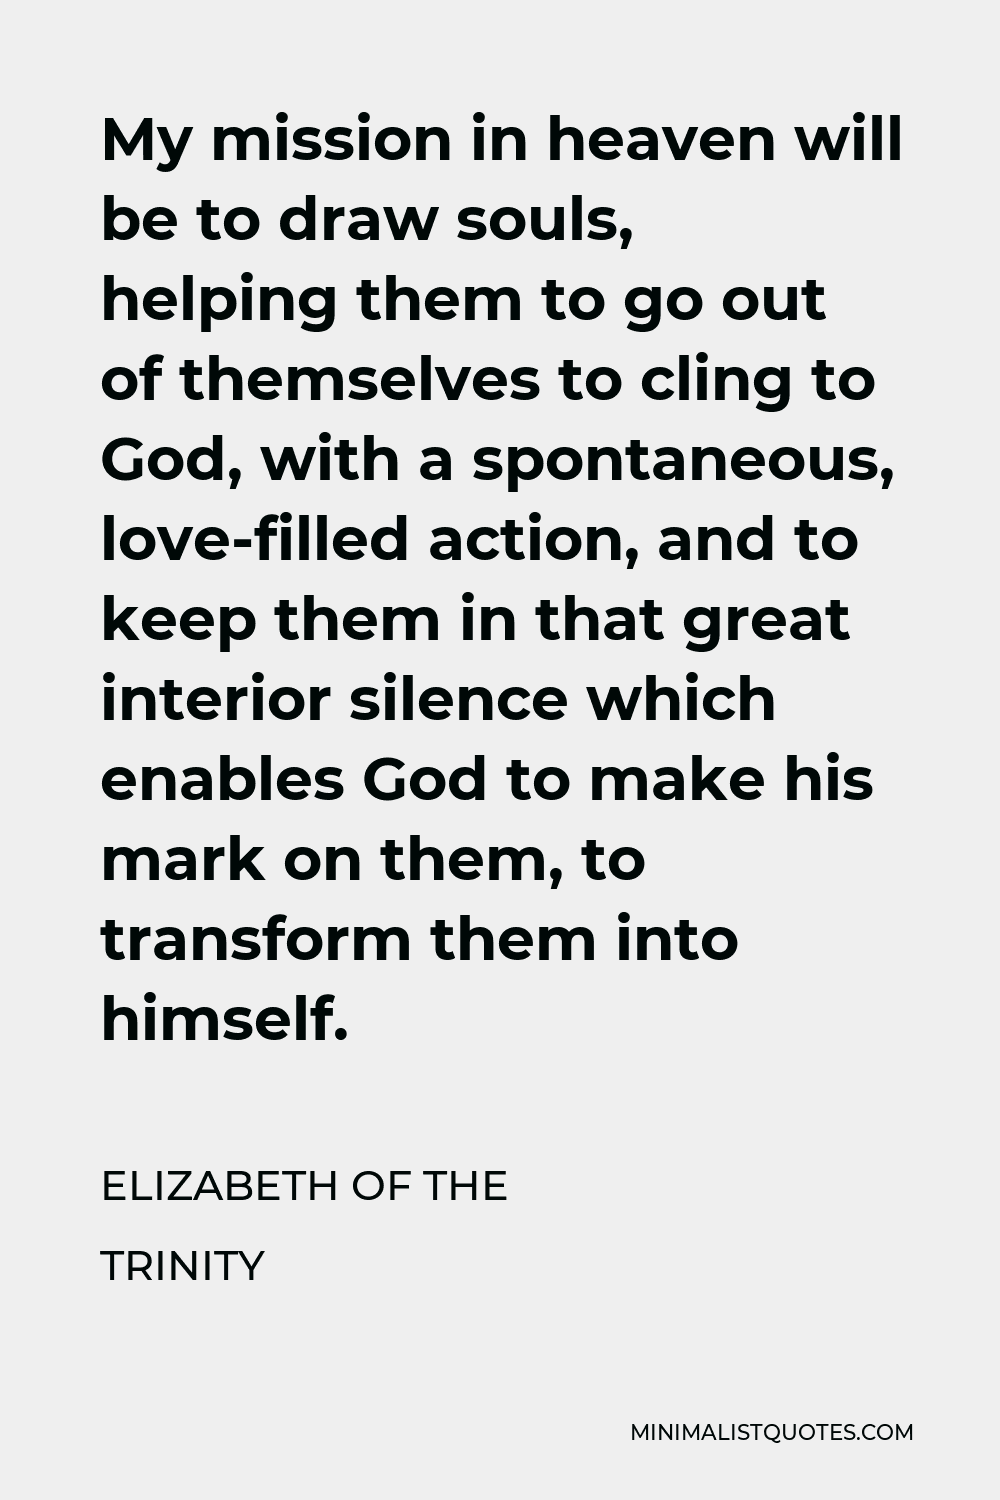 Elizabeth of the Trinity Quote - My mission in heaven will be to draw souls, helping them to go out of themselves to cling to God, with a spontaneous, love-filled action, and to keep them in that great interior silence which enables God to make his mark on them, to transform them into himself.